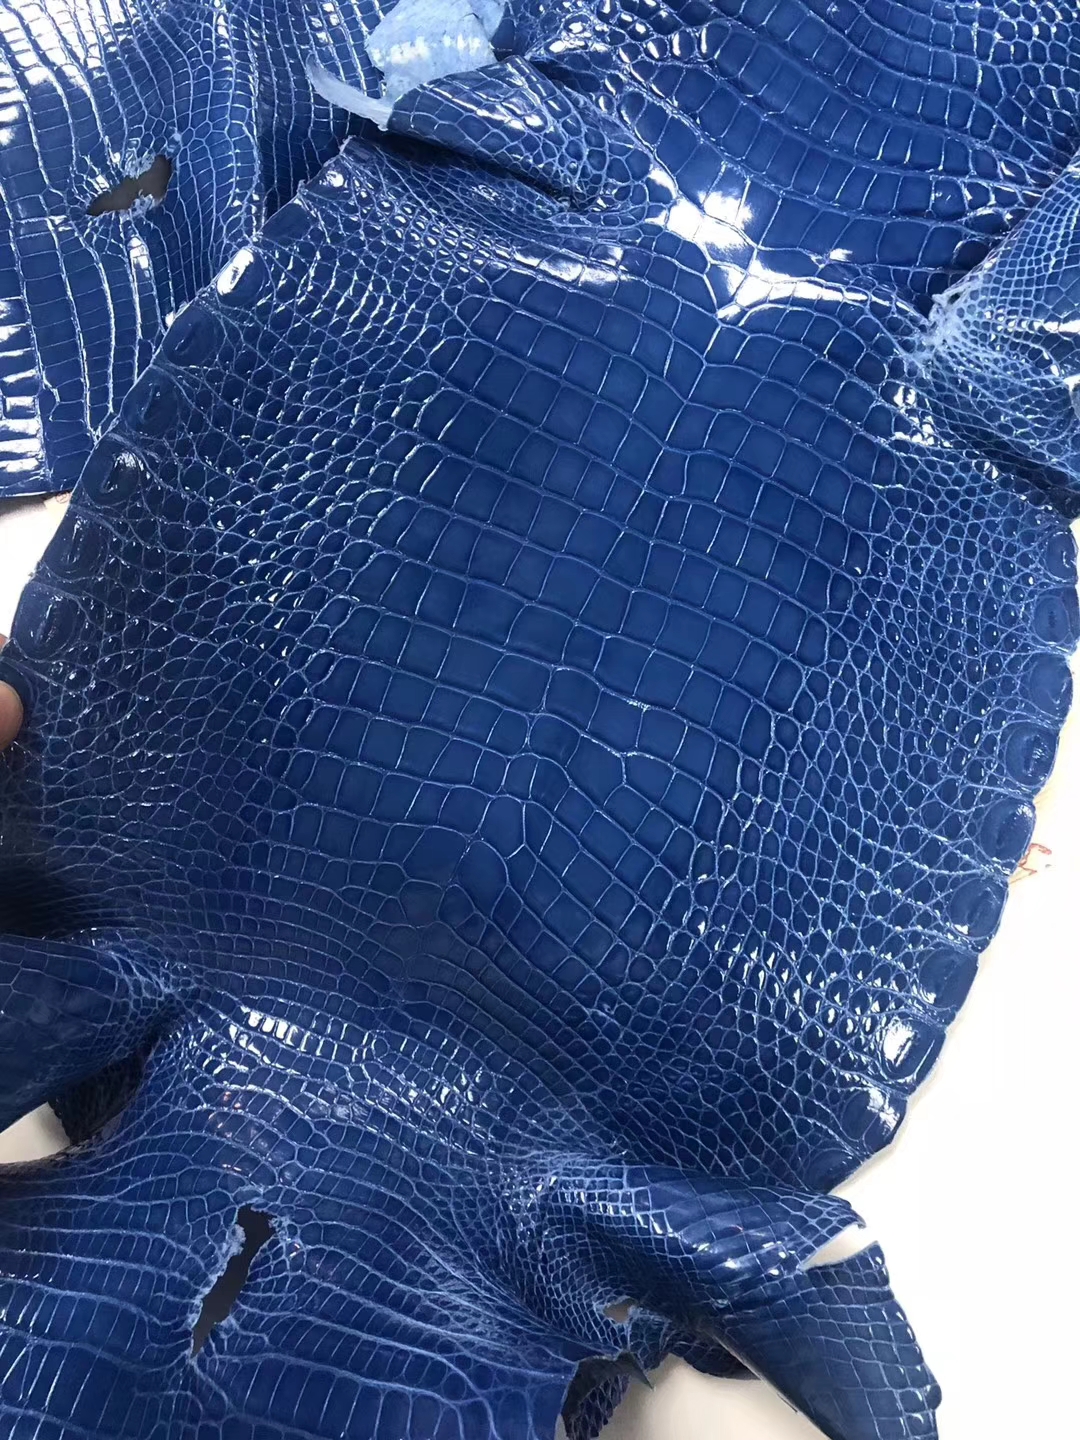 Hermes Shiny Crocodile Leather in 7Q Mykonos Blue Minikelly/Constance Bag Order